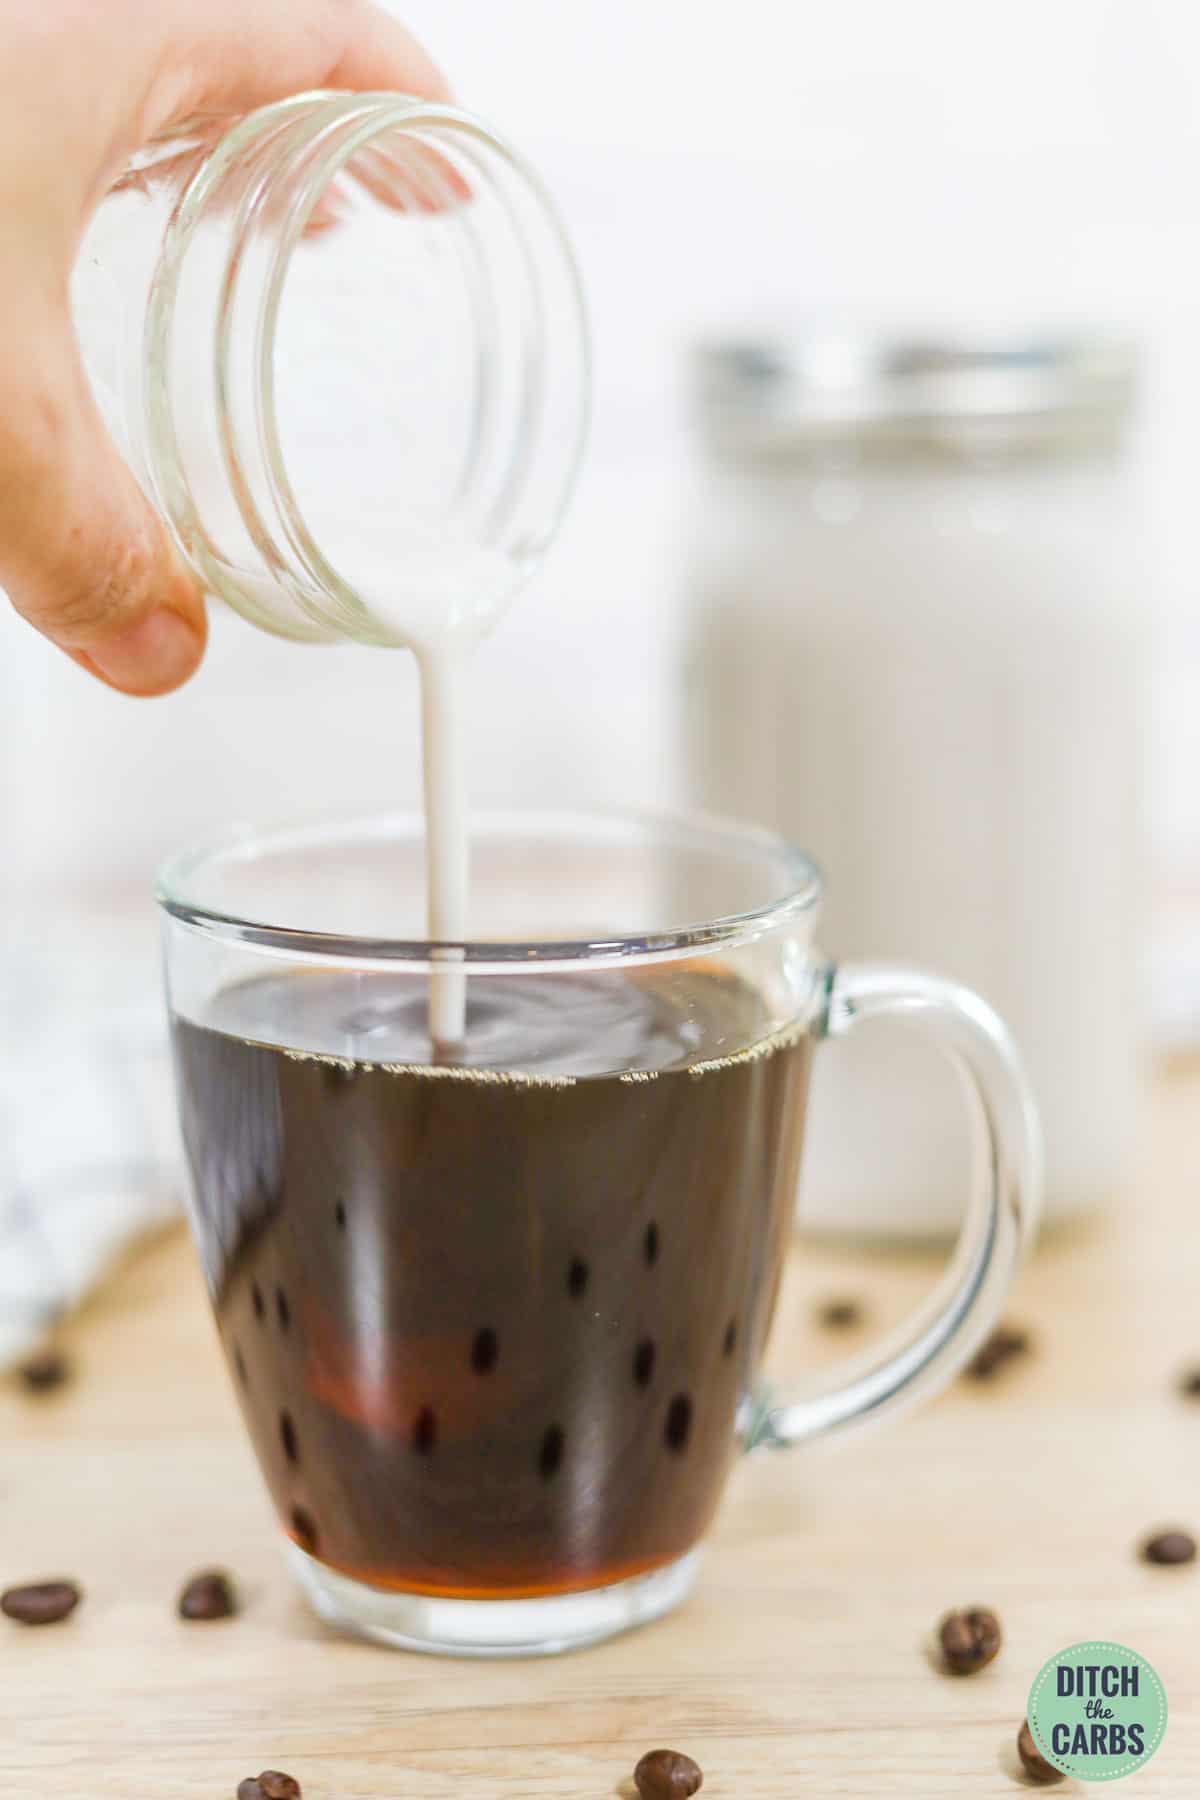 Keto coffee creamer being poured in a clear mug of coffee.